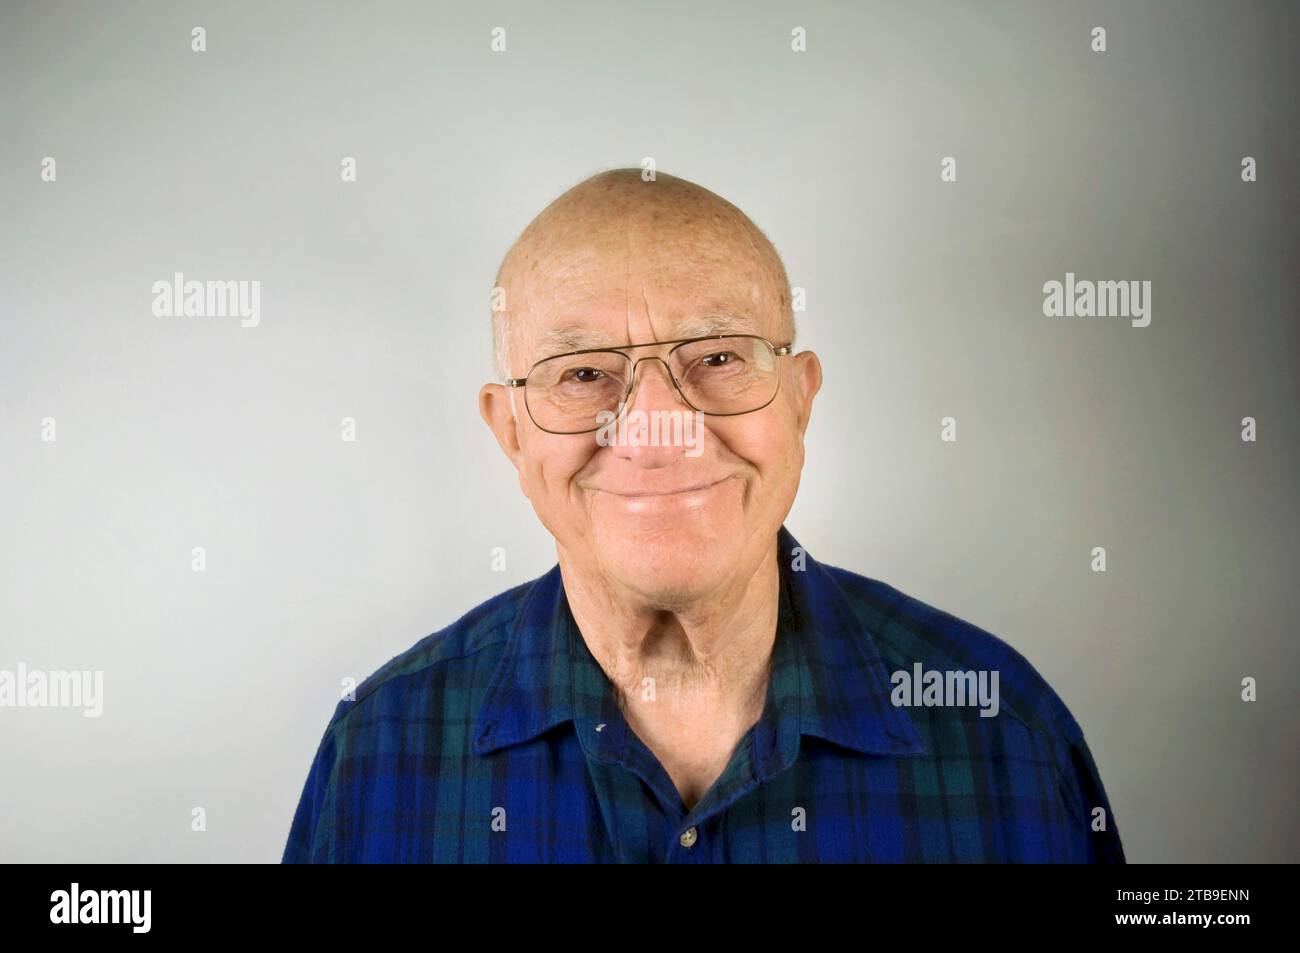 Portrait of an elderly man with a plaid shirt against a white background; Lincoln, Nebraska, United States of America Stock Photo